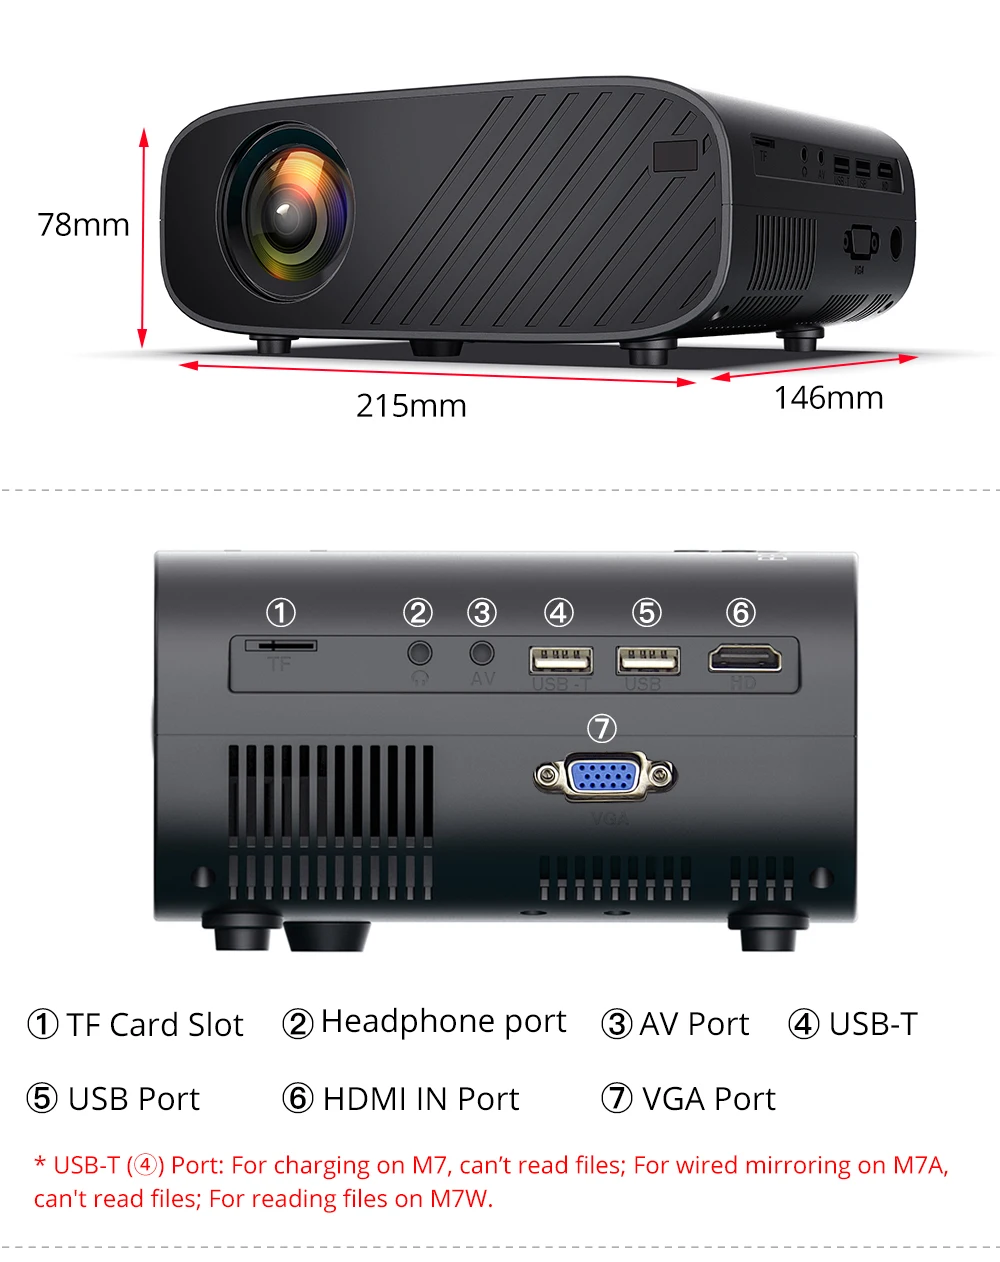 Everycom M7 LED Video Projector 720P Portable Optional Android Wifi Bluetooth Beamer Support Full HD 1080P Home Theater Cinema